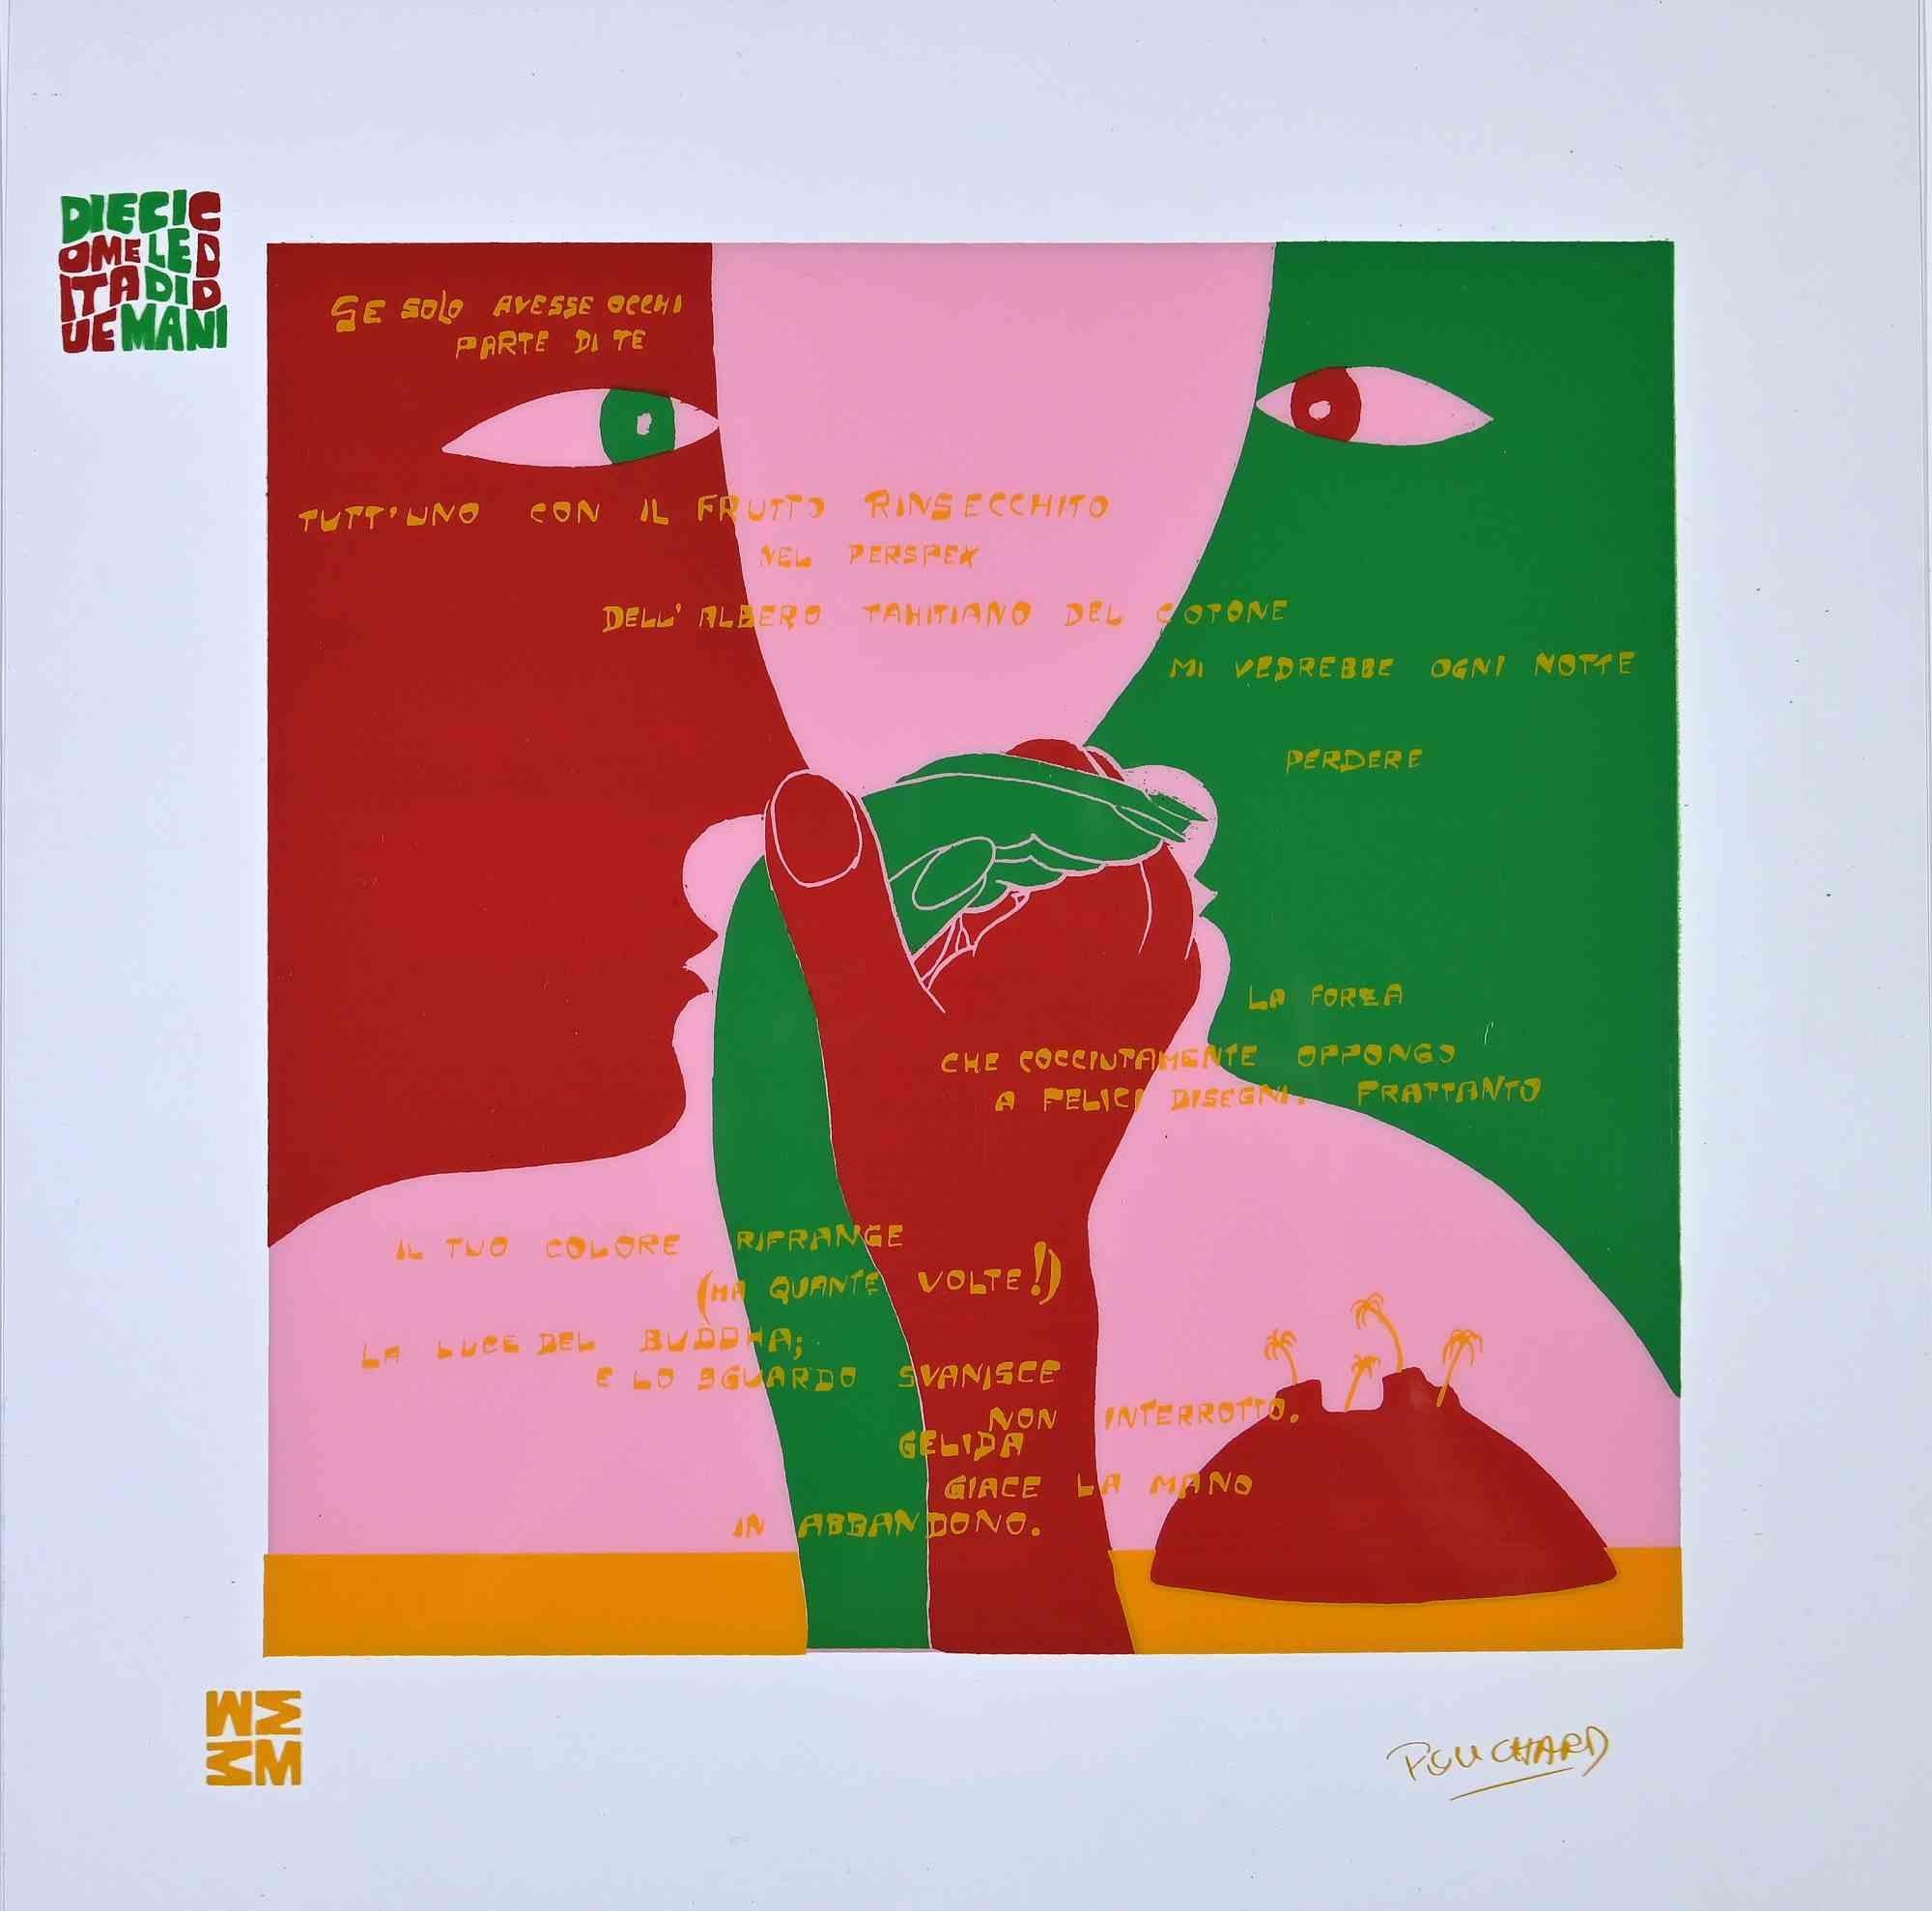 Diecicomeleditadiduemani is a suite of screen prints acetates realized in 1973 by the artist  Ennio Pouchard  (1928).

Signed on plate  on the lower right.

From the porfolio " Diecicomeleditadiduemani ", containing 10 silk-screen prints on